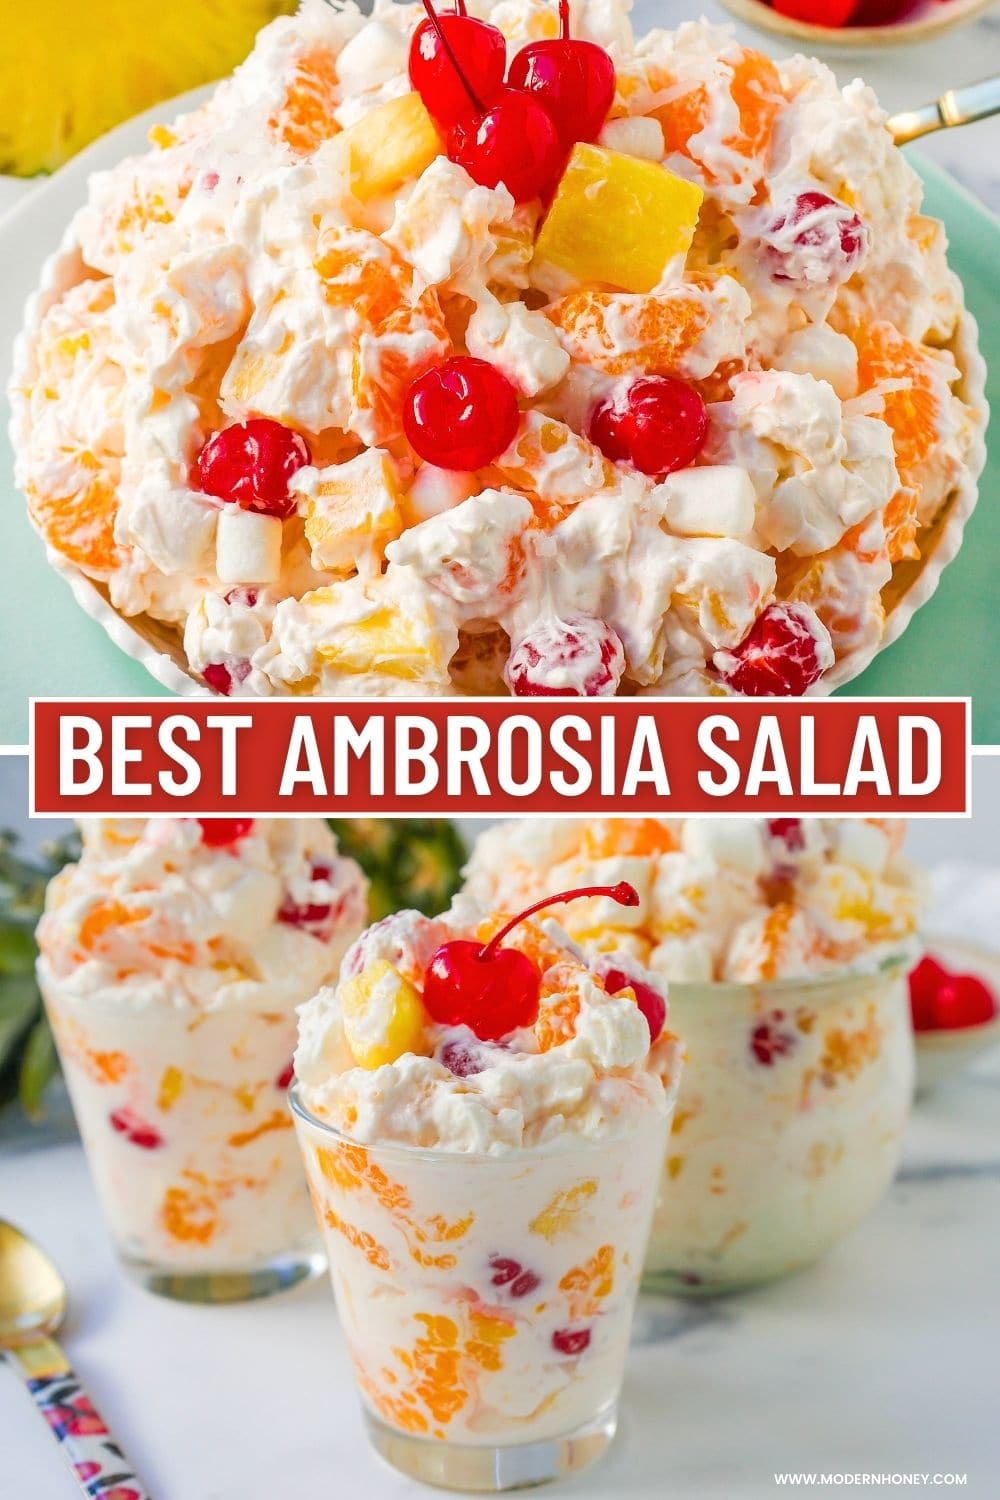 The Best Ambrosia Salad is a fluffy salad made with fresh pineapple, mandarin oranges, maraschino cherries, coconut, marshmallows, fresh whipped cream, a touch of sour cream, and sugar. This is a nostalgic, classic side dish or dessert recipe.